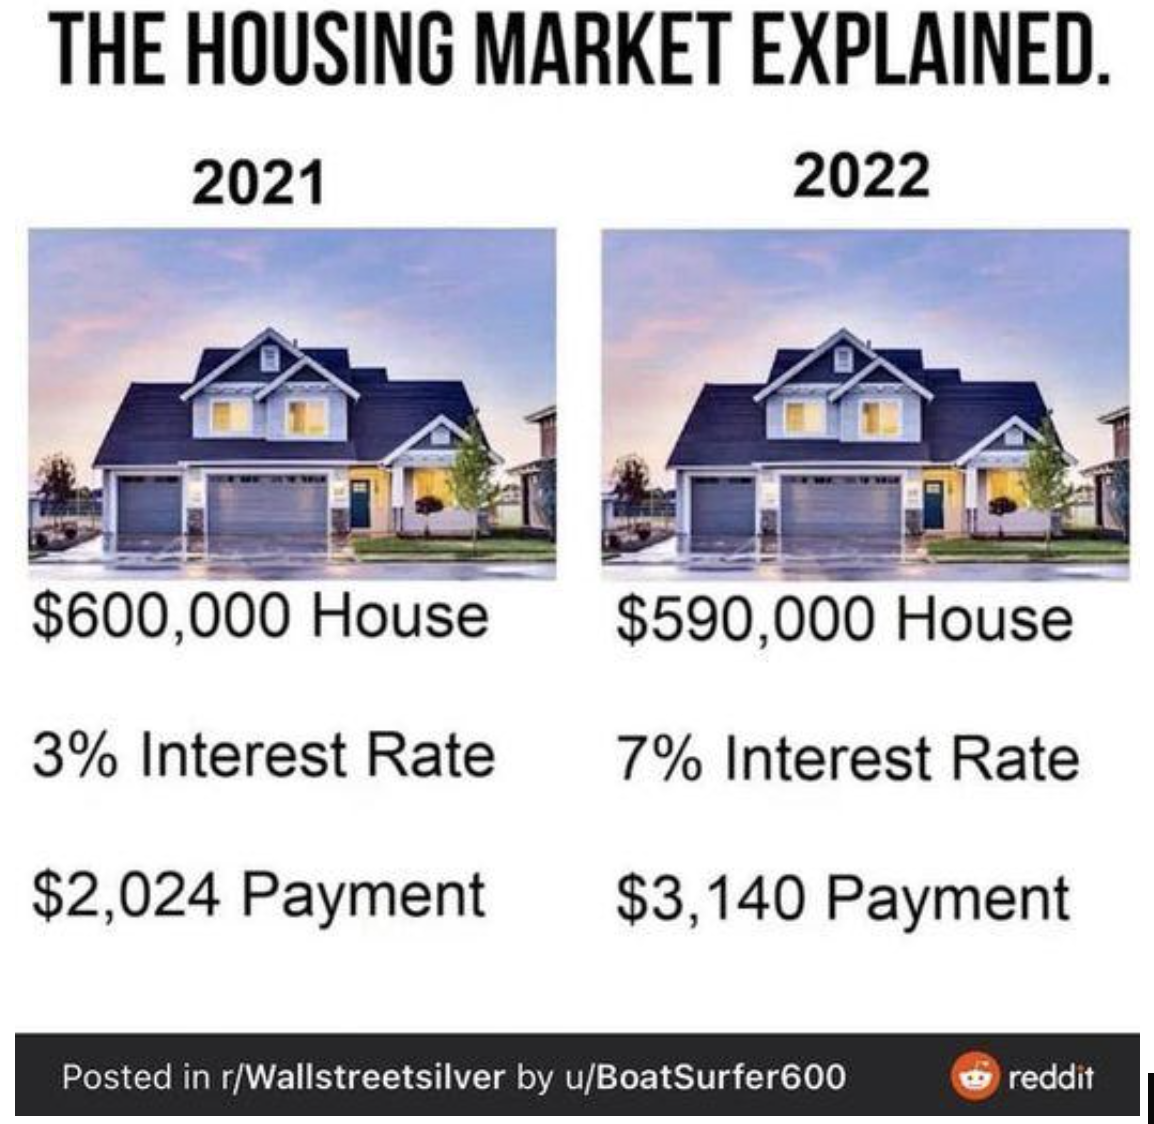 Meme about cost of housing in 2021-2022